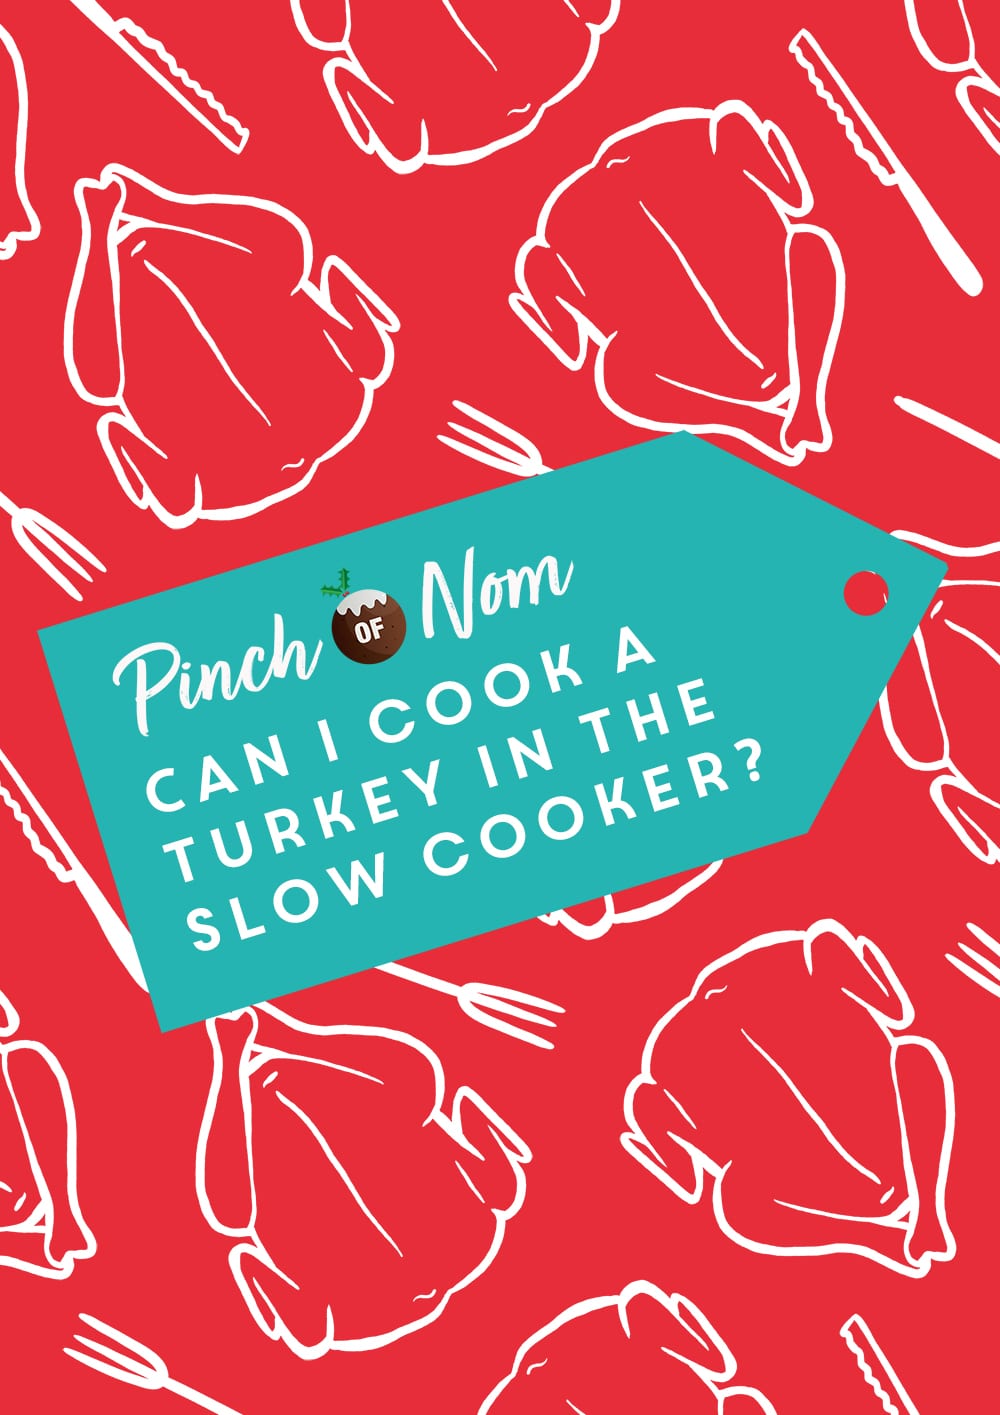 Can I Cook a Turkey in the Slow Cooker? | Pinch of Nom Slimming Recipes